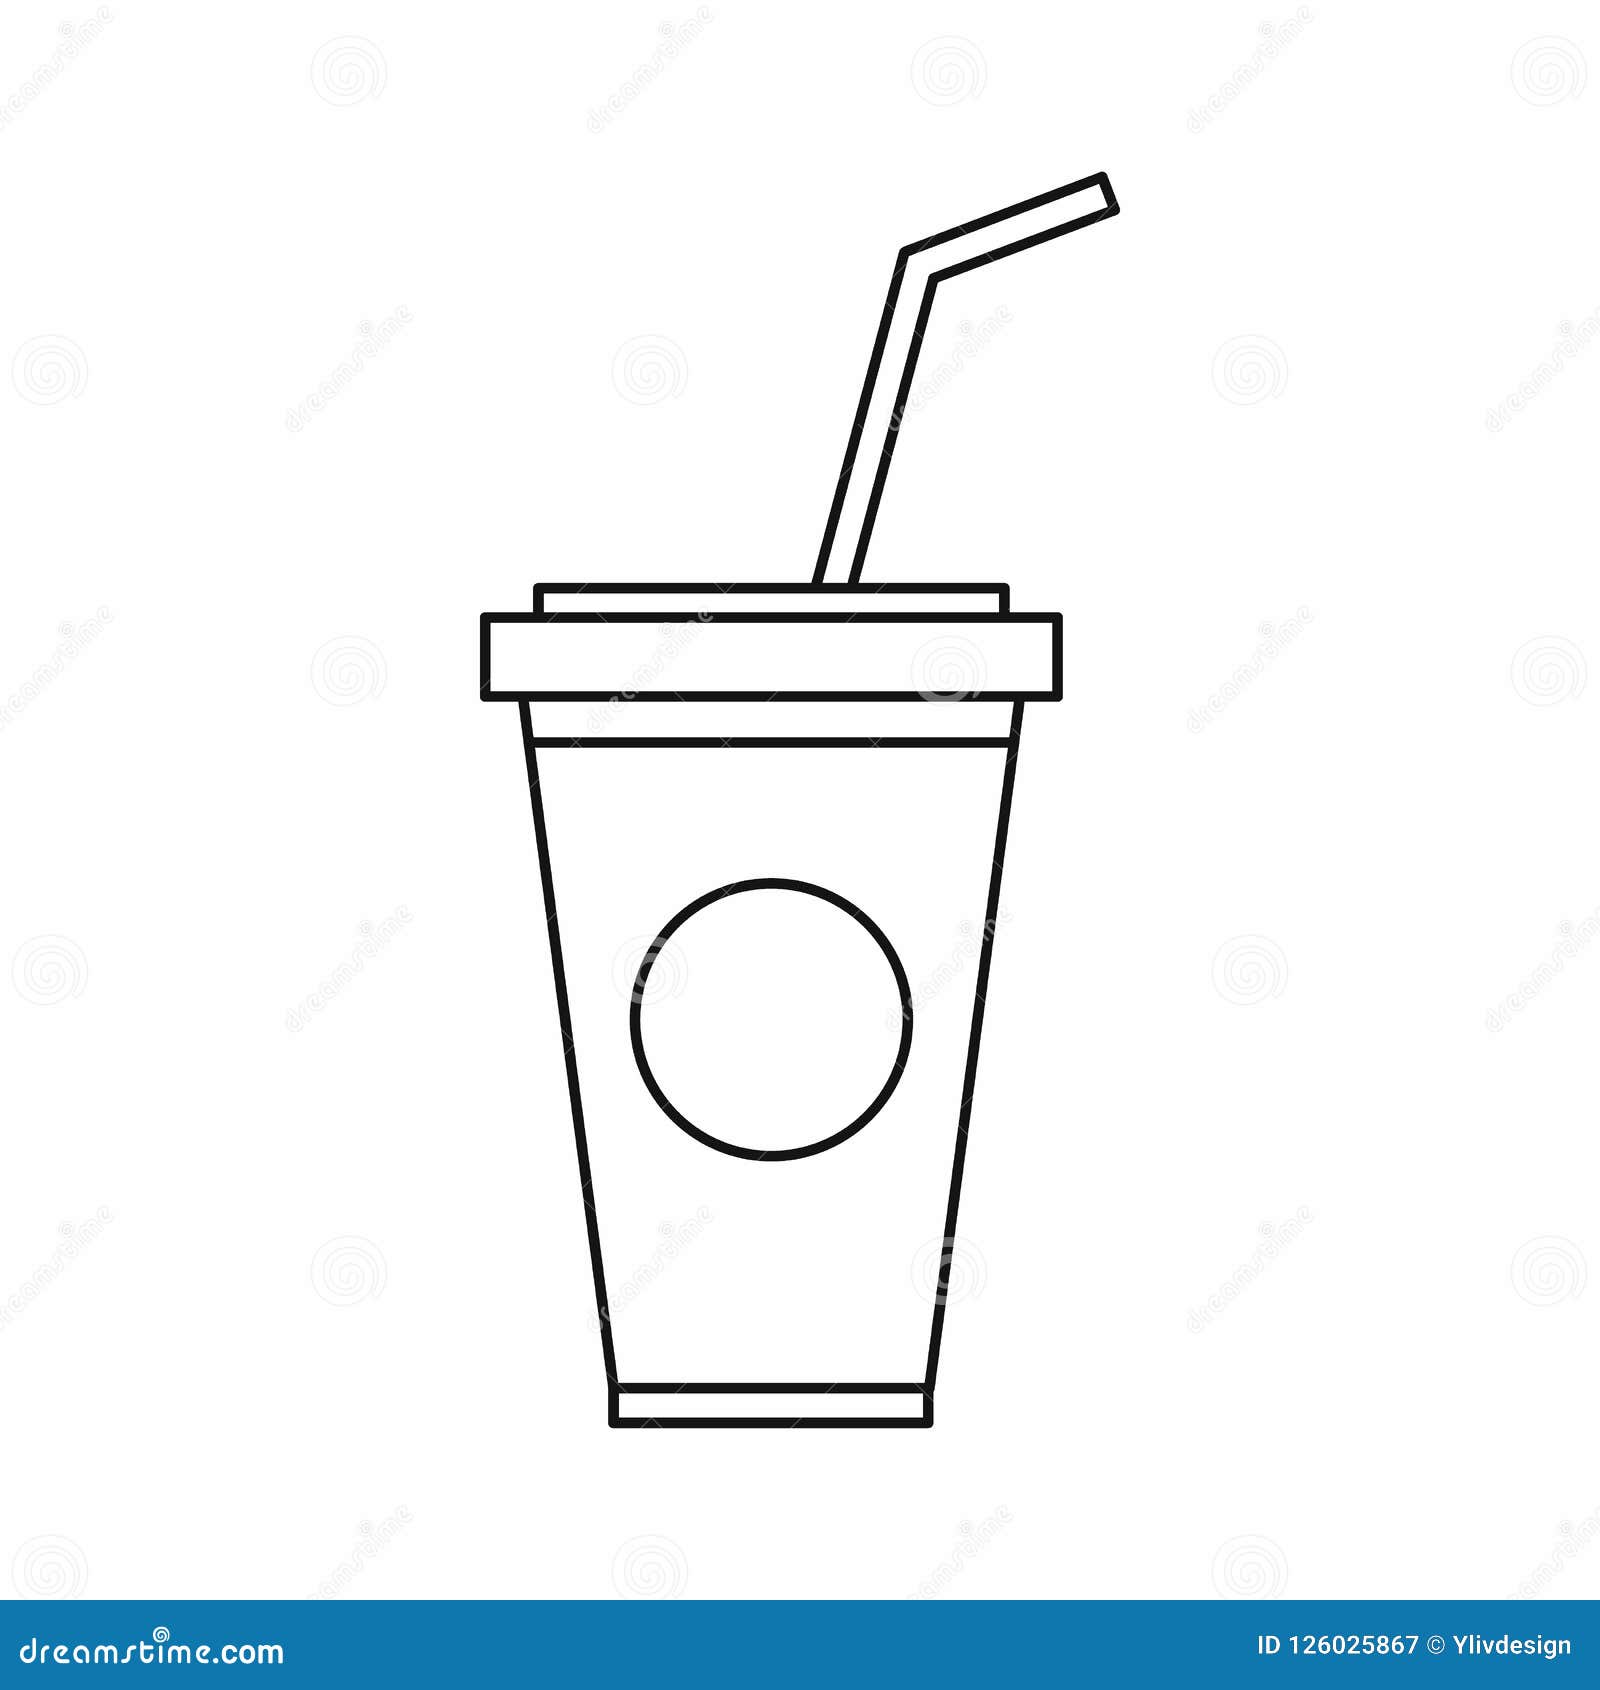 287,800+ Soft Drink Cup Stock Illustrations, Royalty-Free Vector